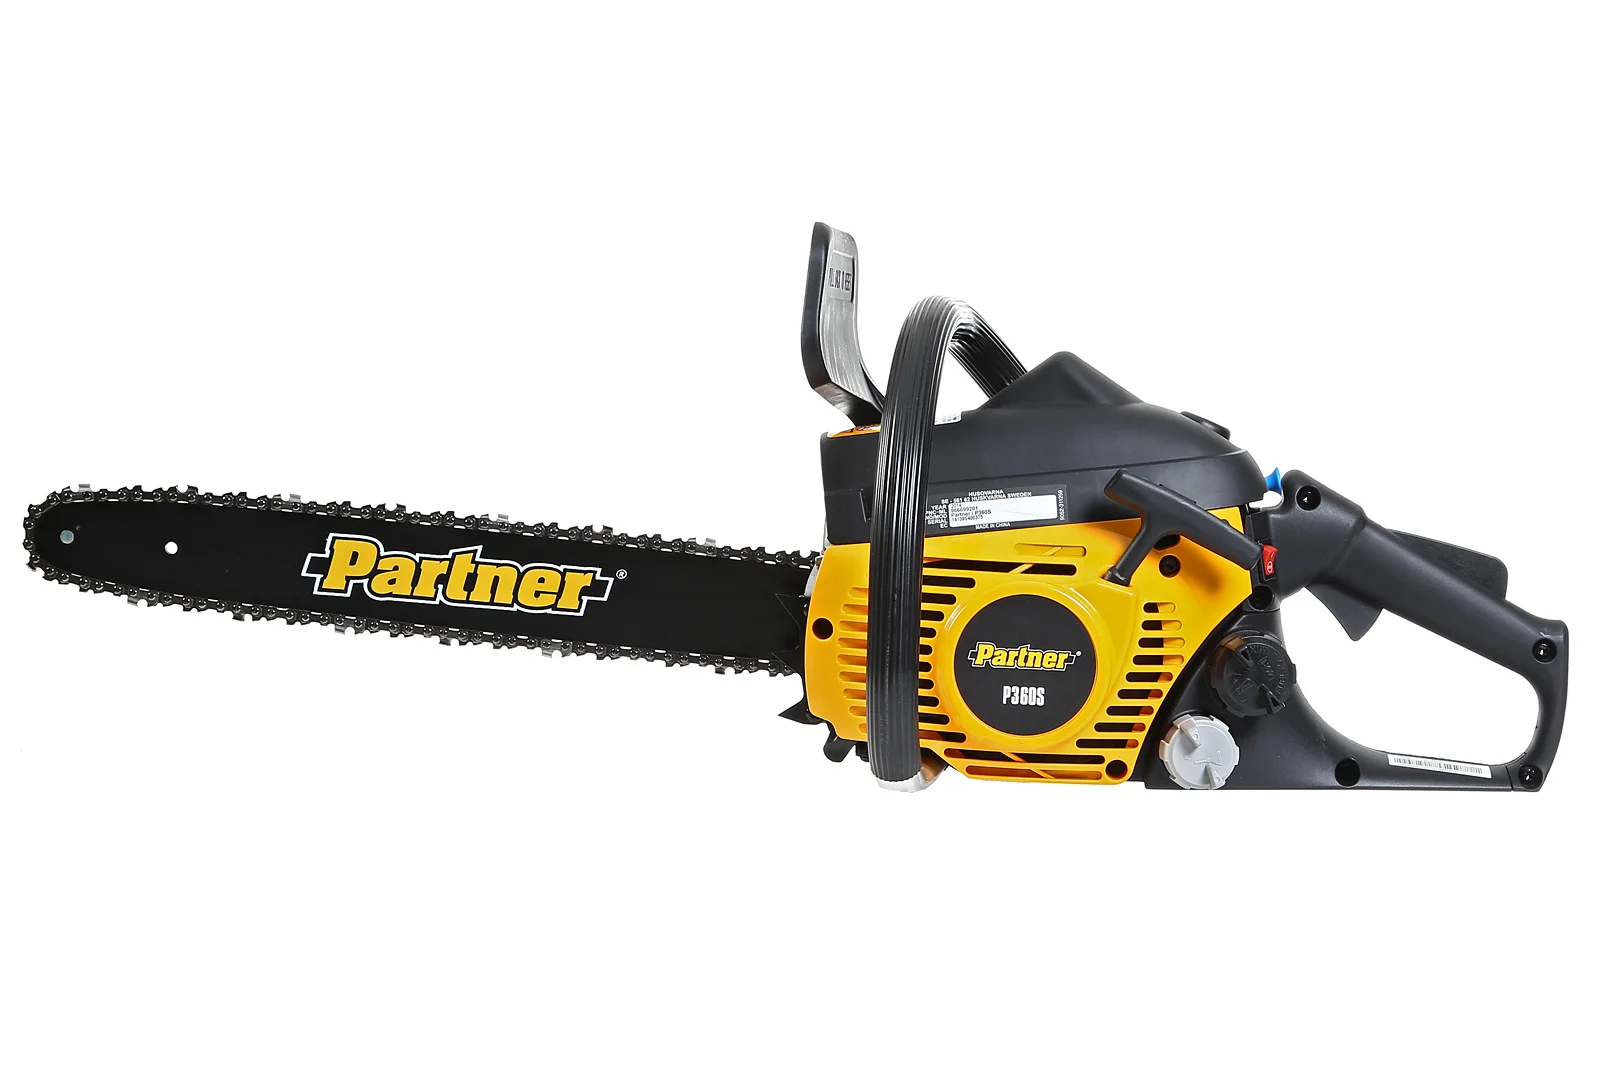 168.77US $ |New Chainsaw PARTNER P360S free shipping in 7 days|shipping gif...